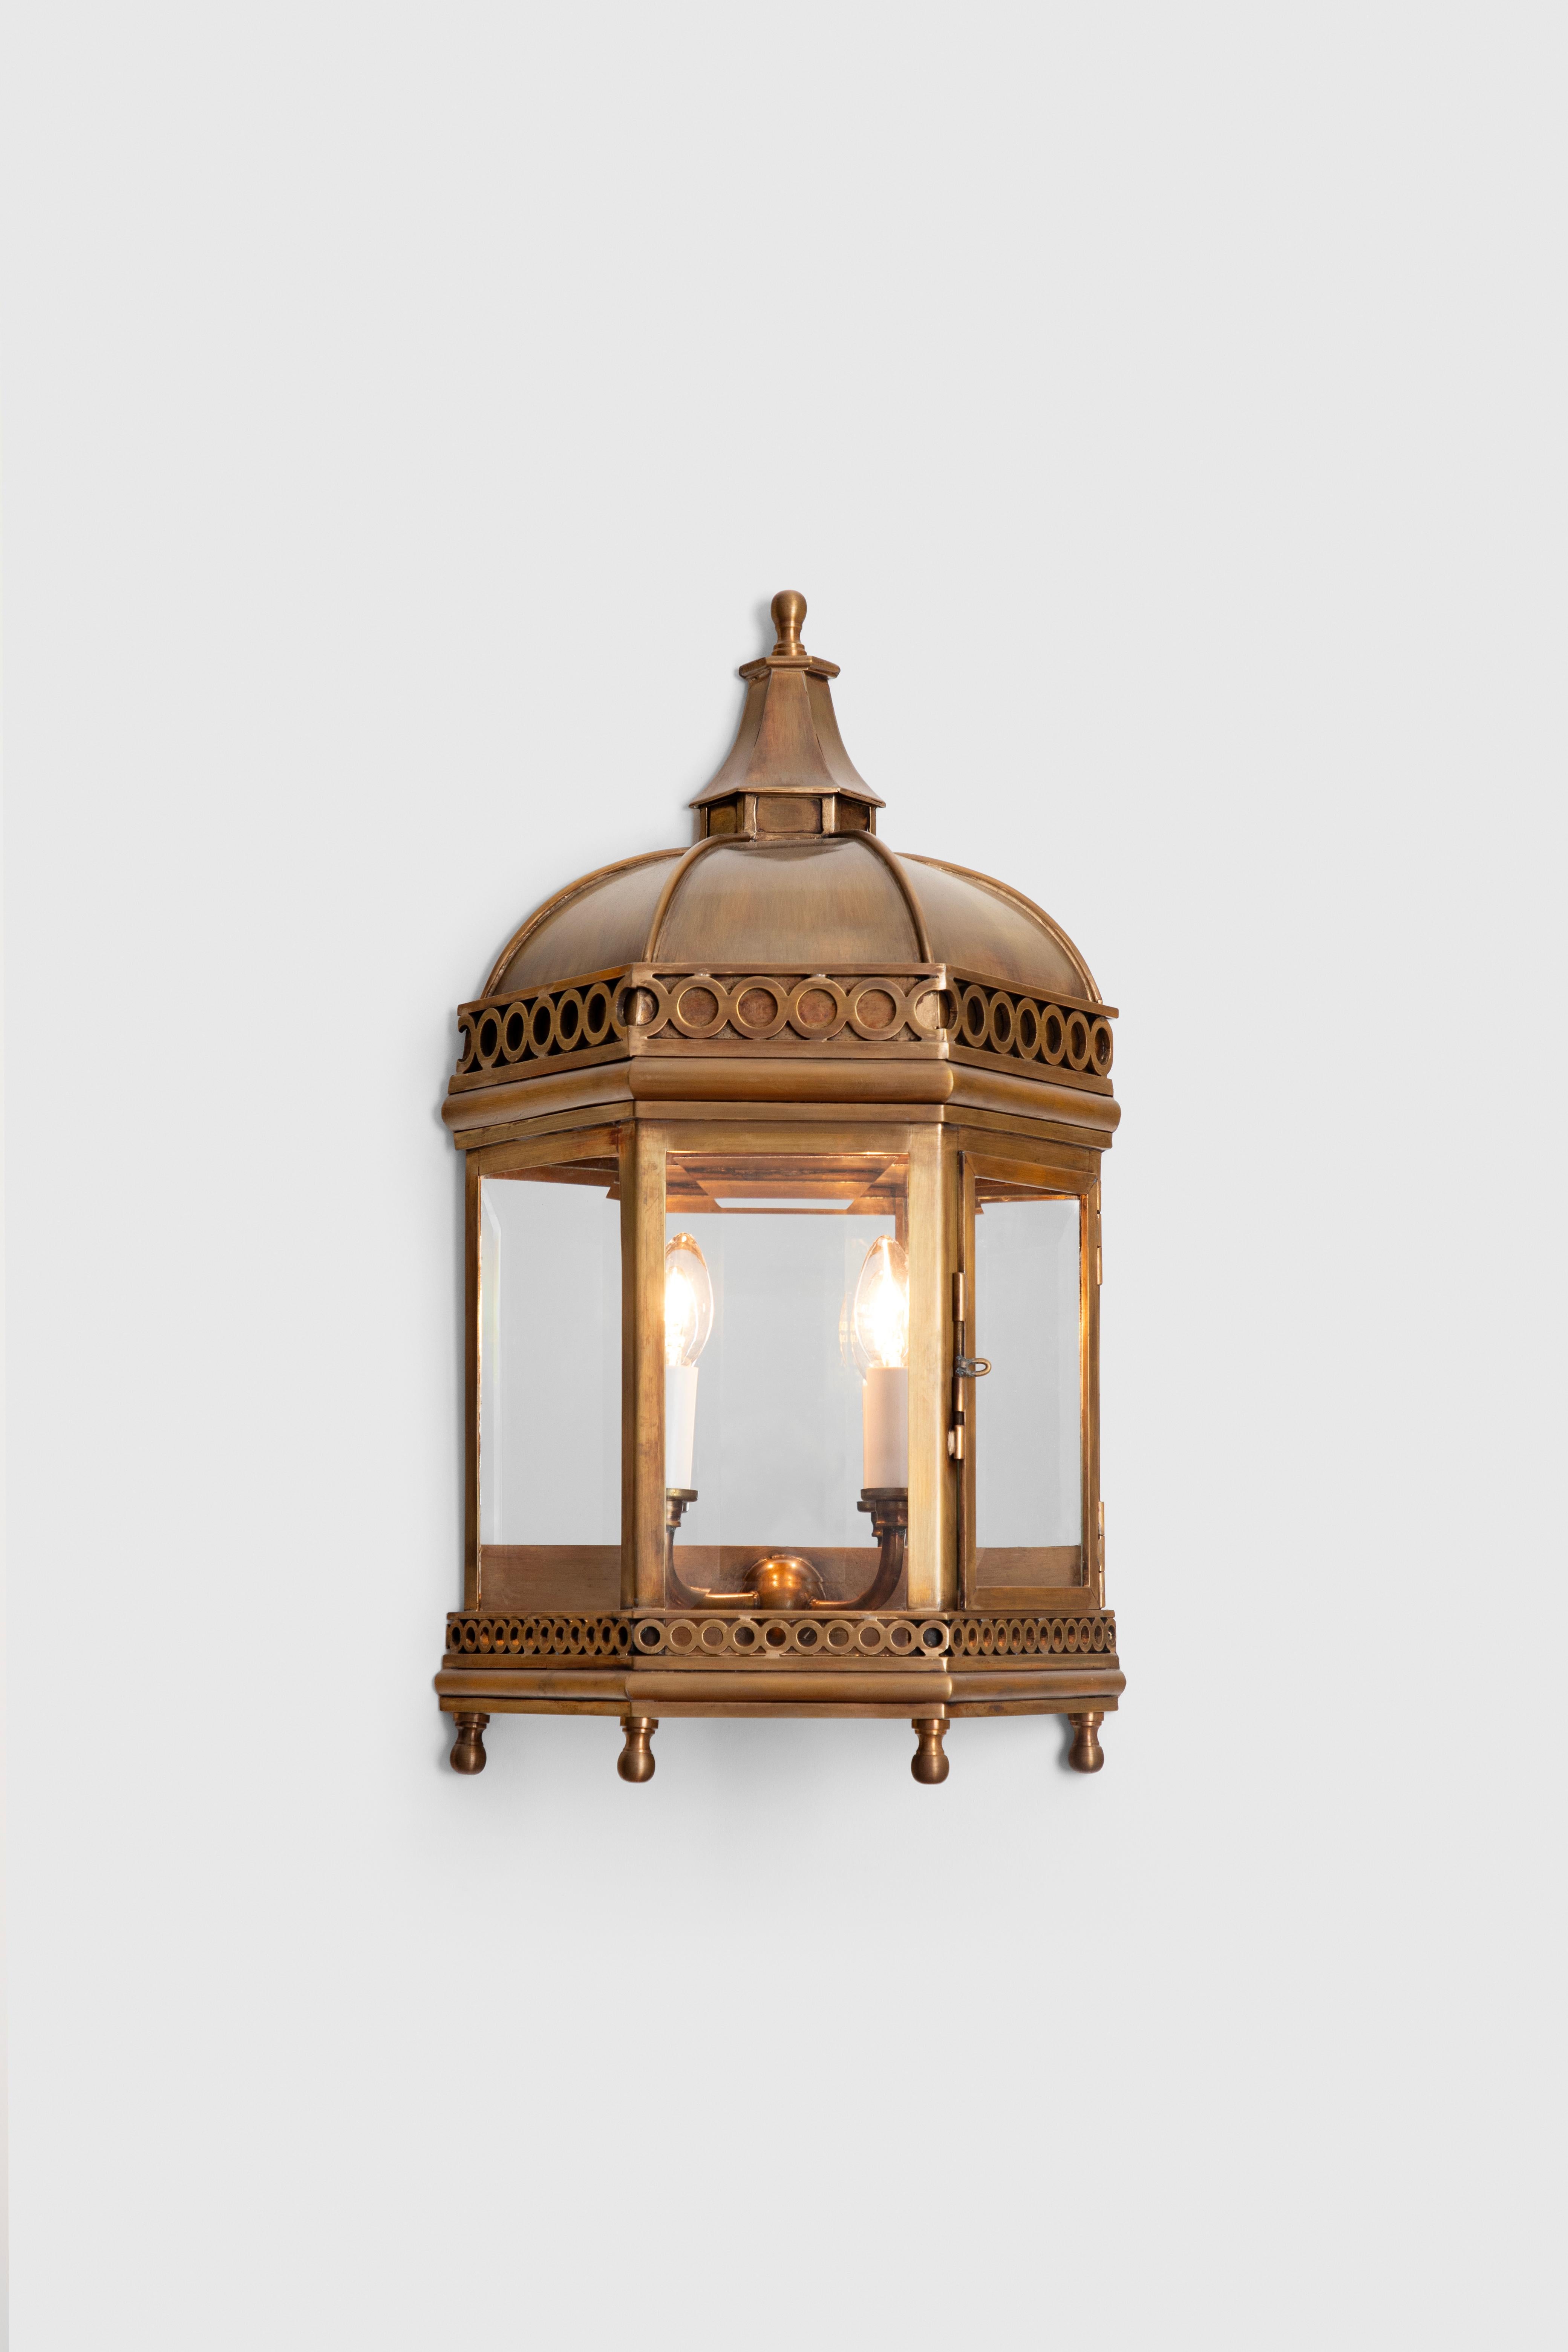 This wall lantern is hand made in bronze by craftsmen in Mexico City. 
Each piece is designed with outmost attention to detail.